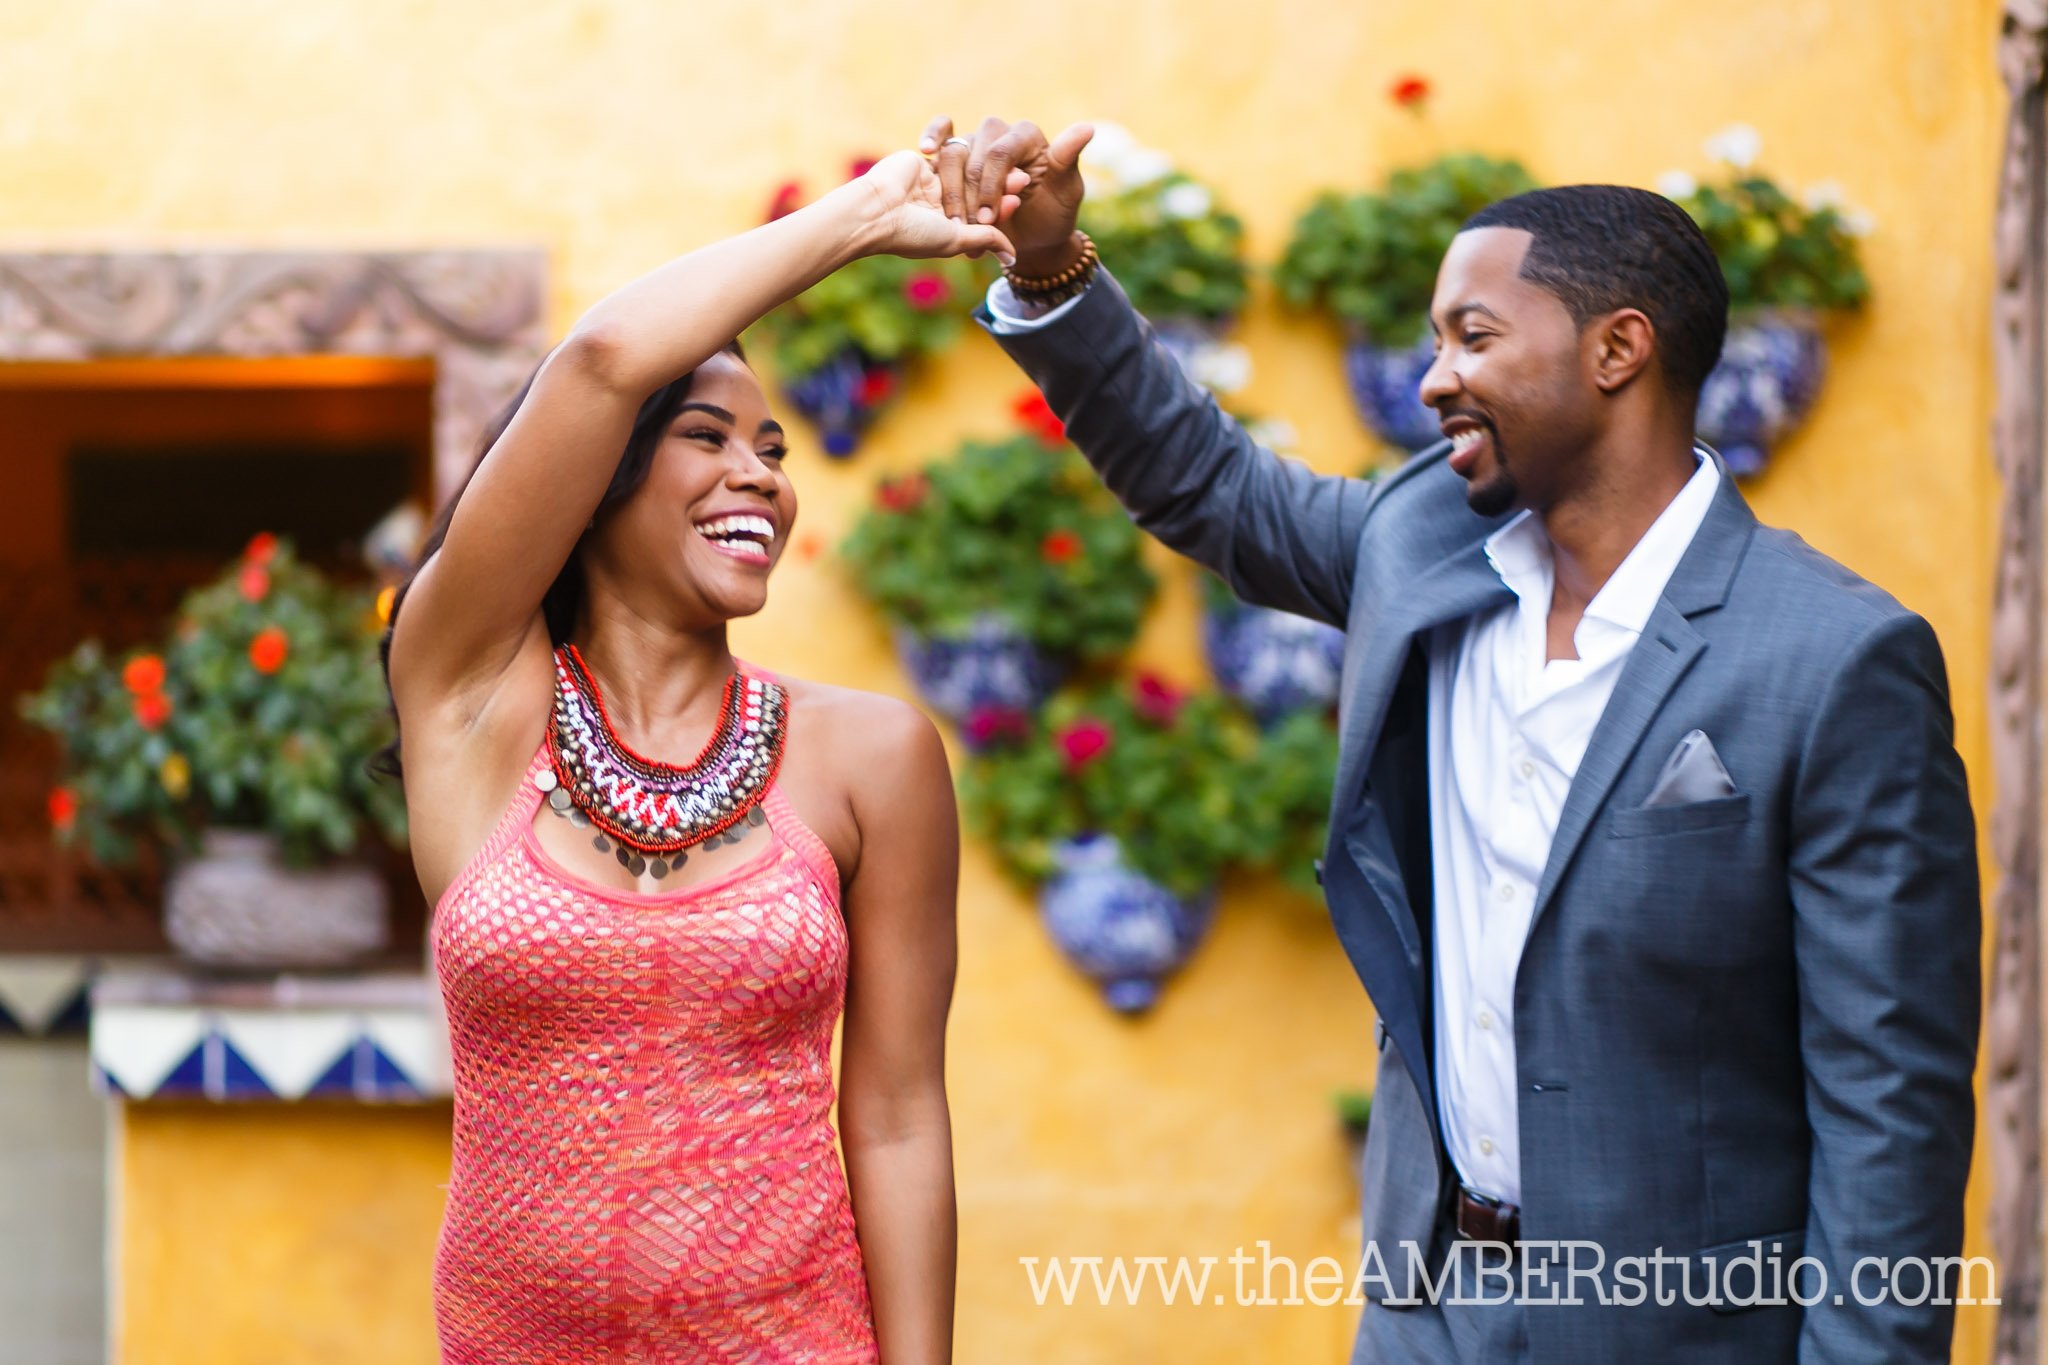 black-wedding-photographer-dallas-texas-engagement-photos-amber-knowles-studio-fort-worth-botanical-gardens-red-dress-suit-african-american-couple-cc0009